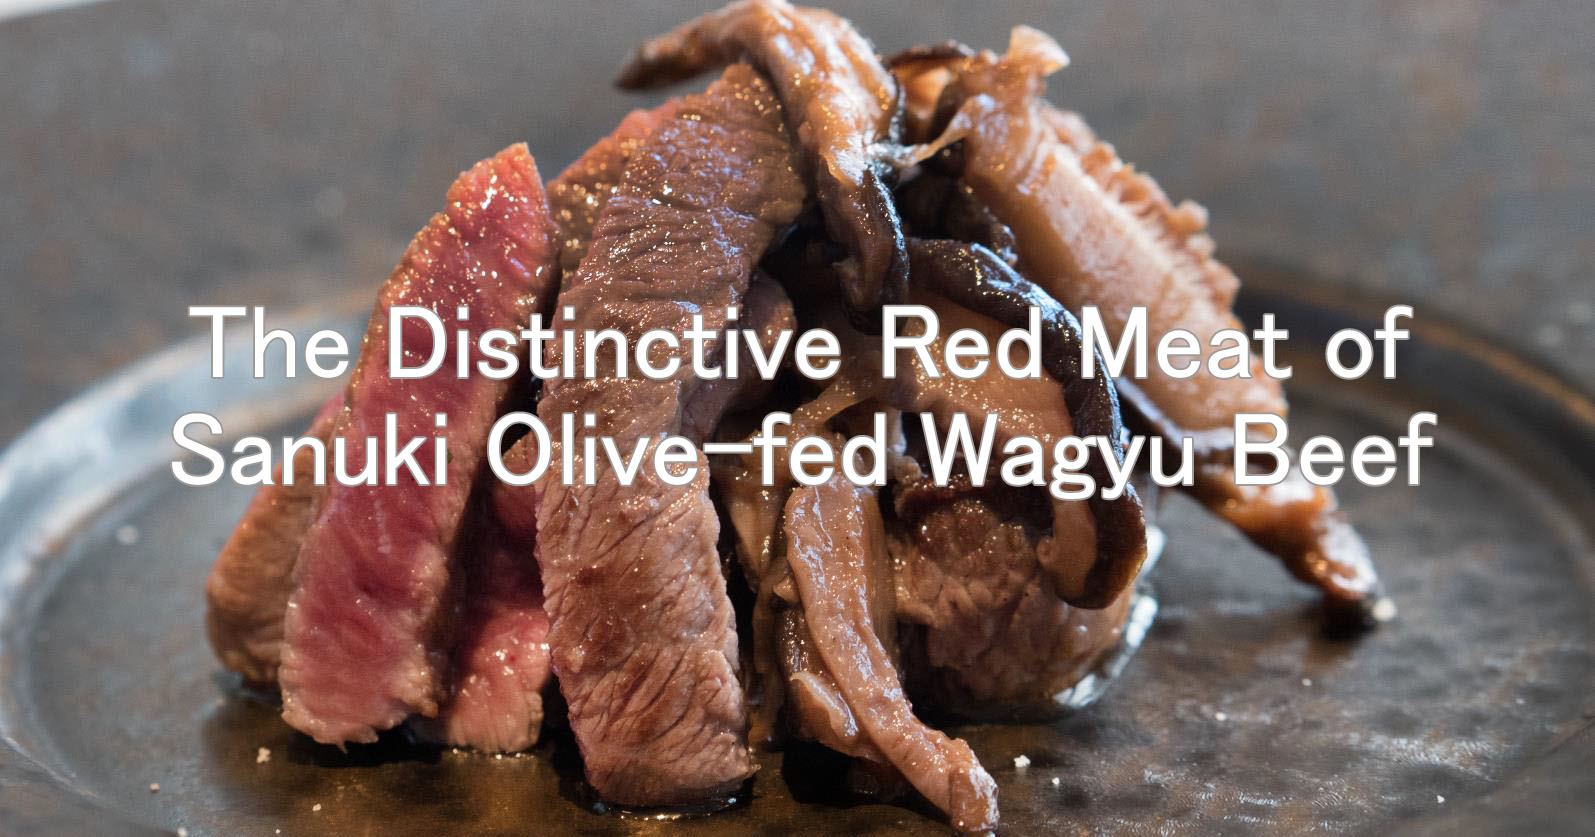 The Distinctive Red Meat of Sanuki Olive-fed Wagyu Beef